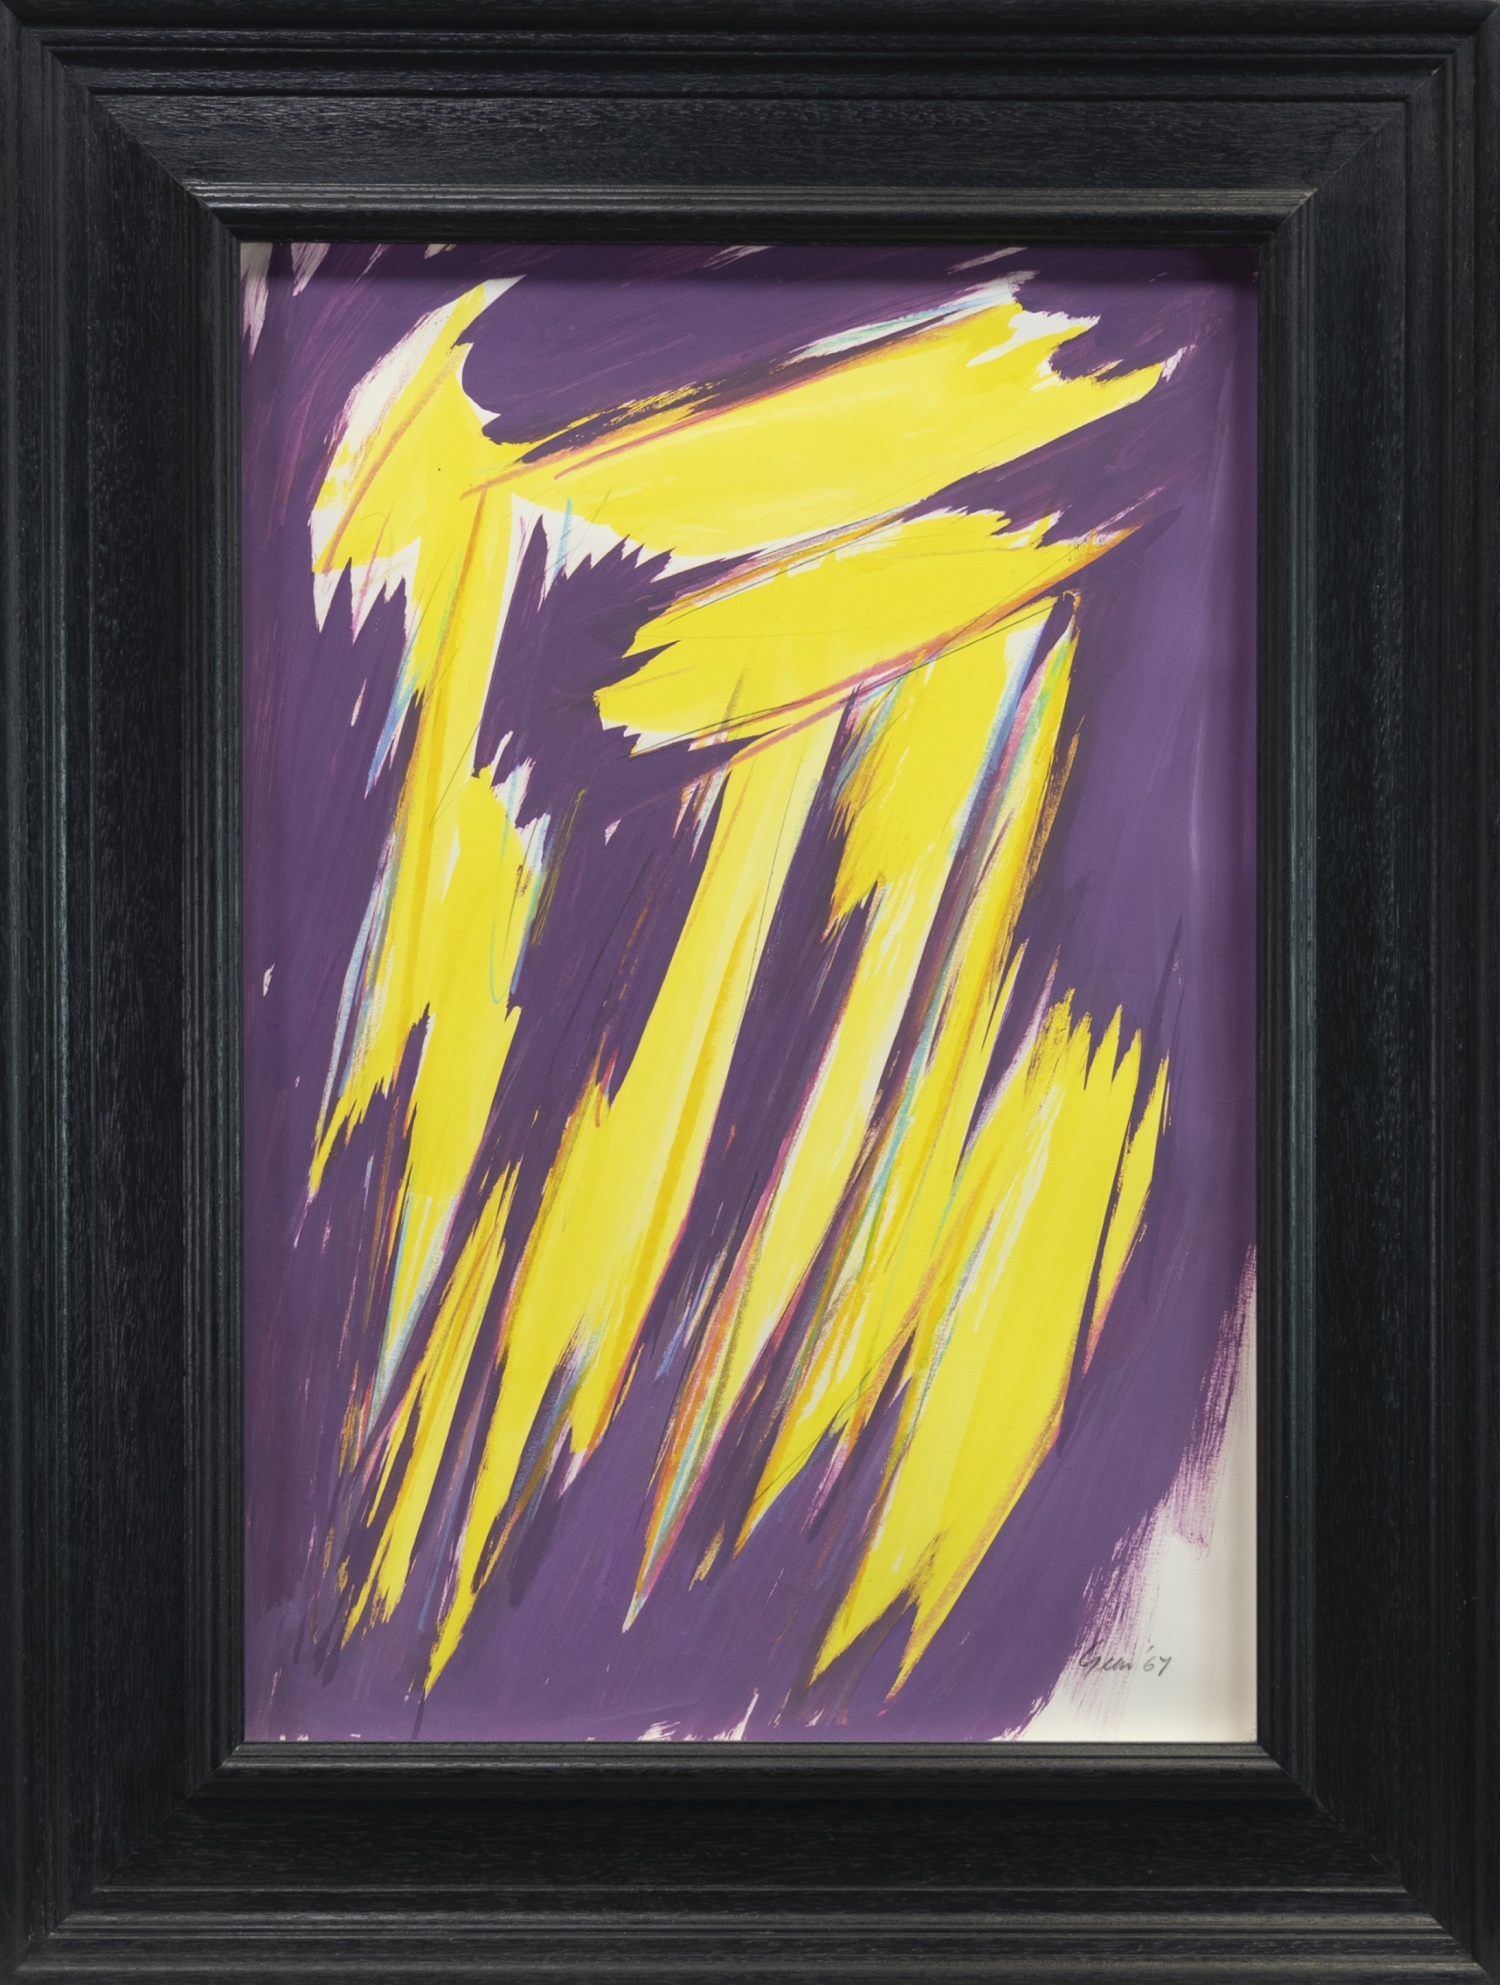 YELLOW STRUCTURE, A MIXED MEDIA BY WILLIAM GEAR